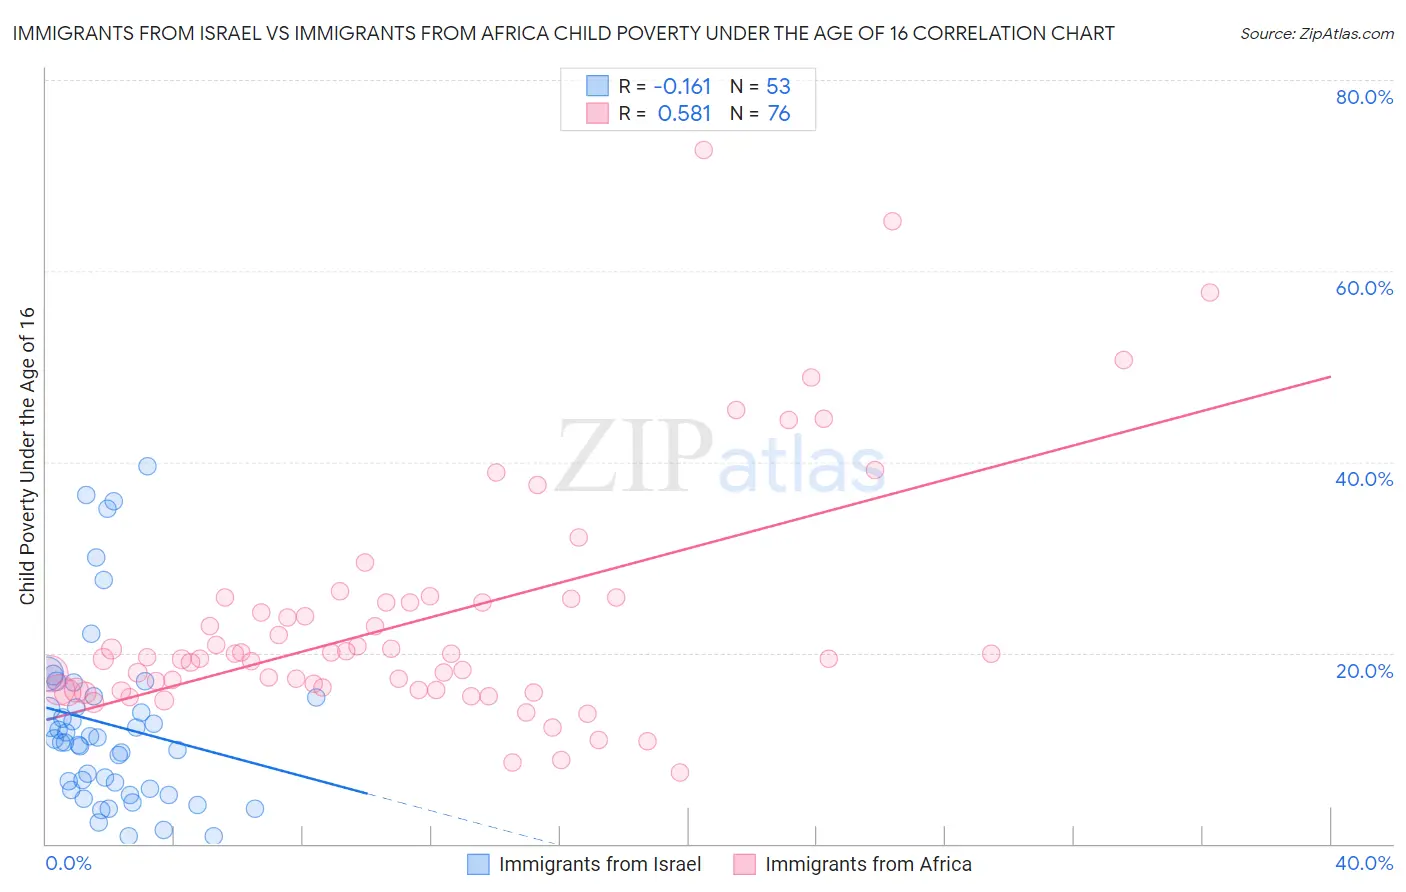 Immigrants from Israel vs Immigrants from Africa Child Poverty Under the Age of 16